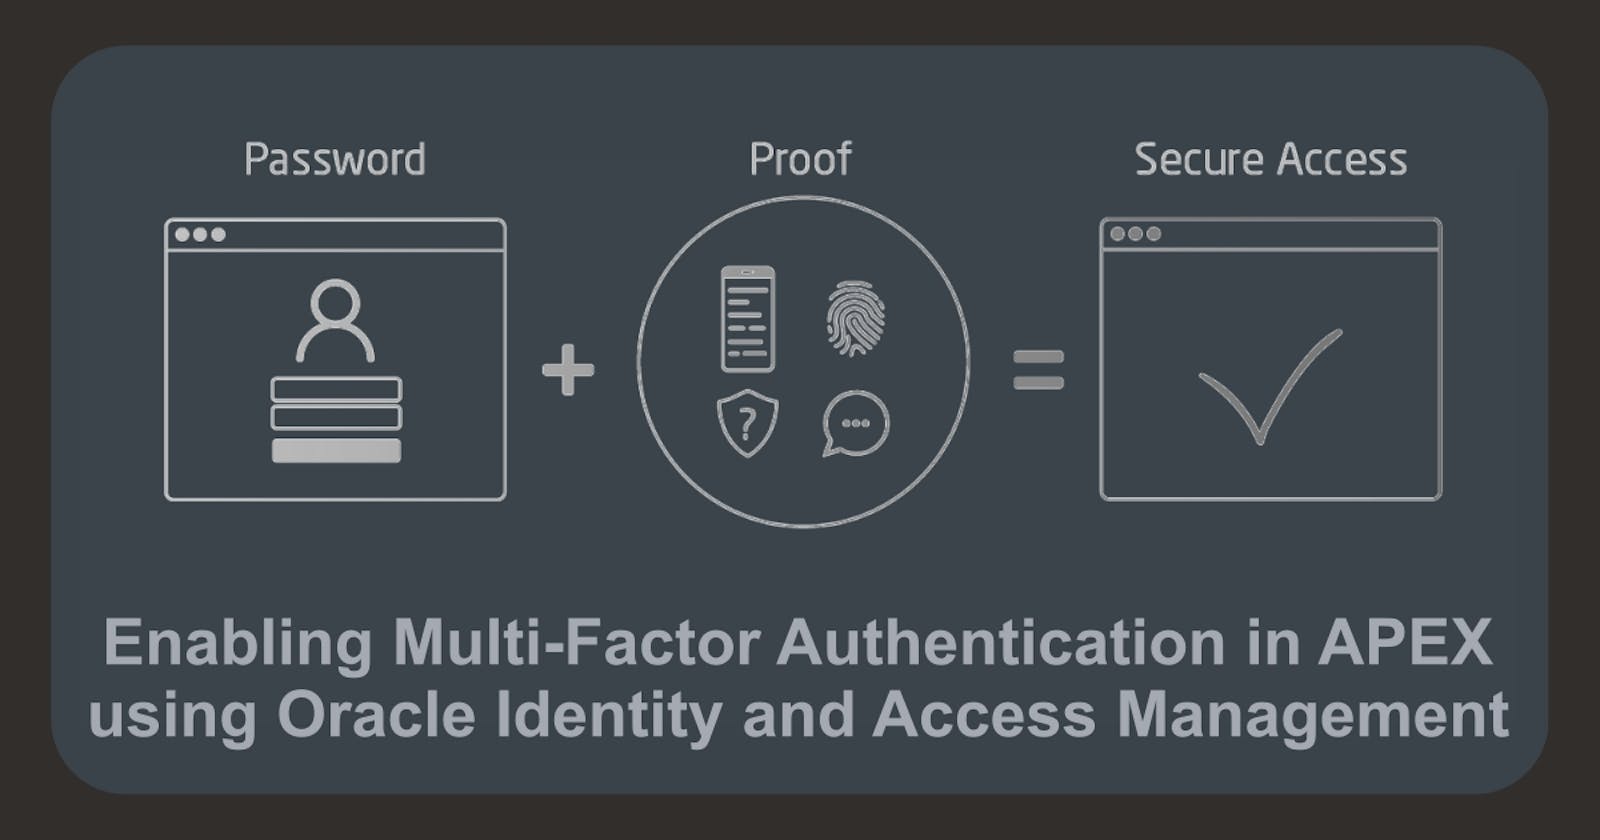 Enabling Multi-Factor Authentication in APEX using Oracle Identity and Access Management